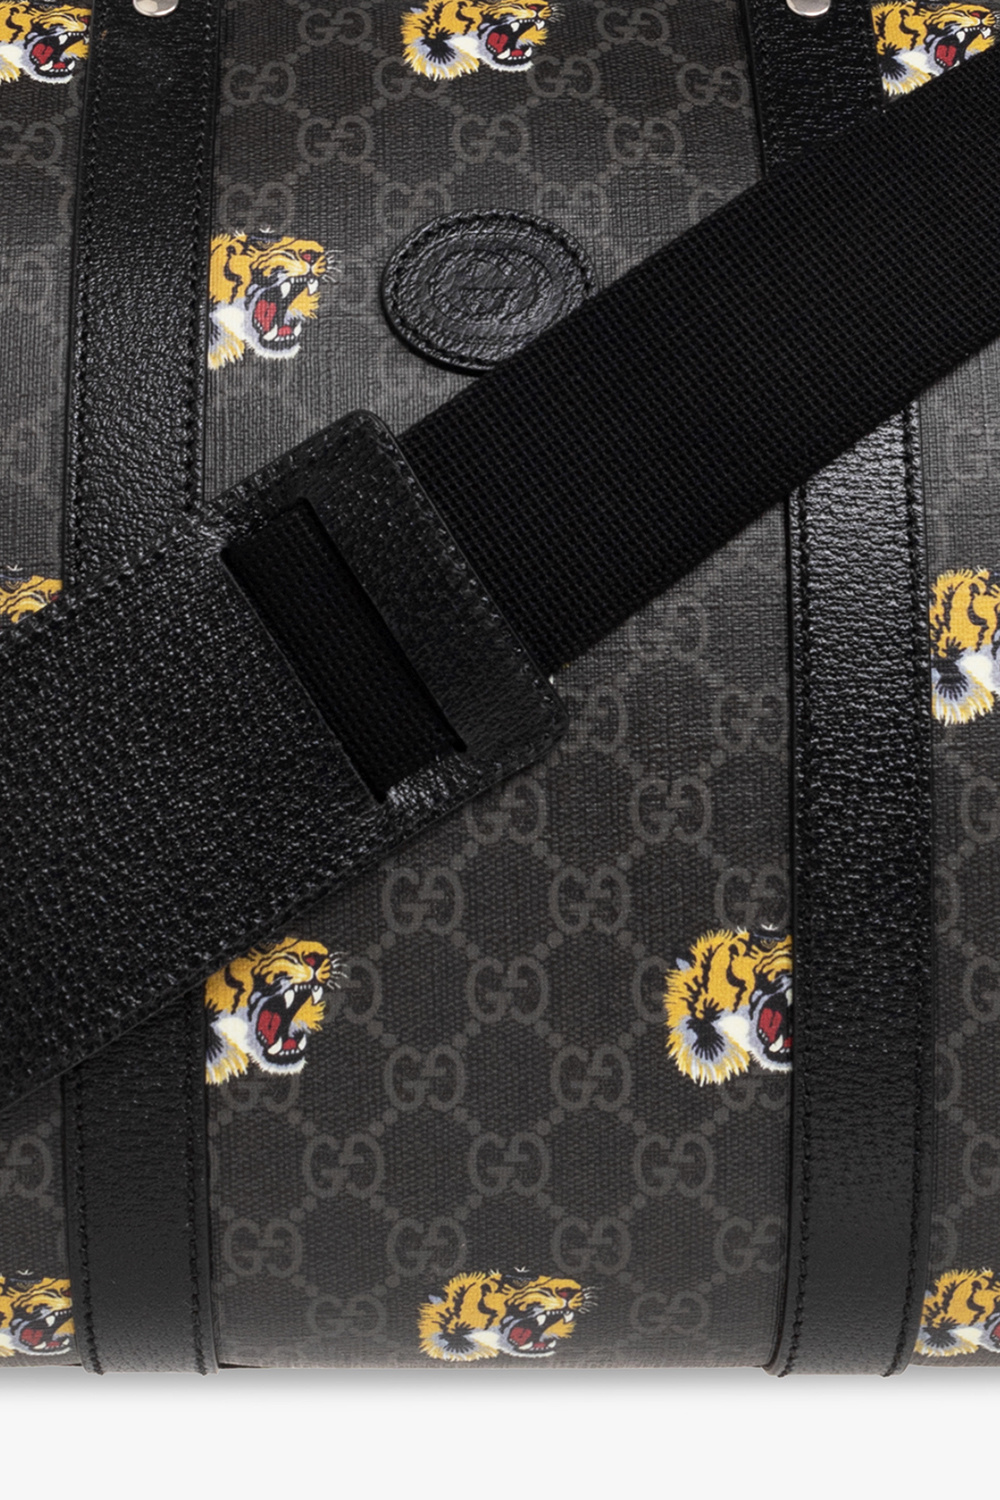 Gucci Bestiary Messenger with Tigers